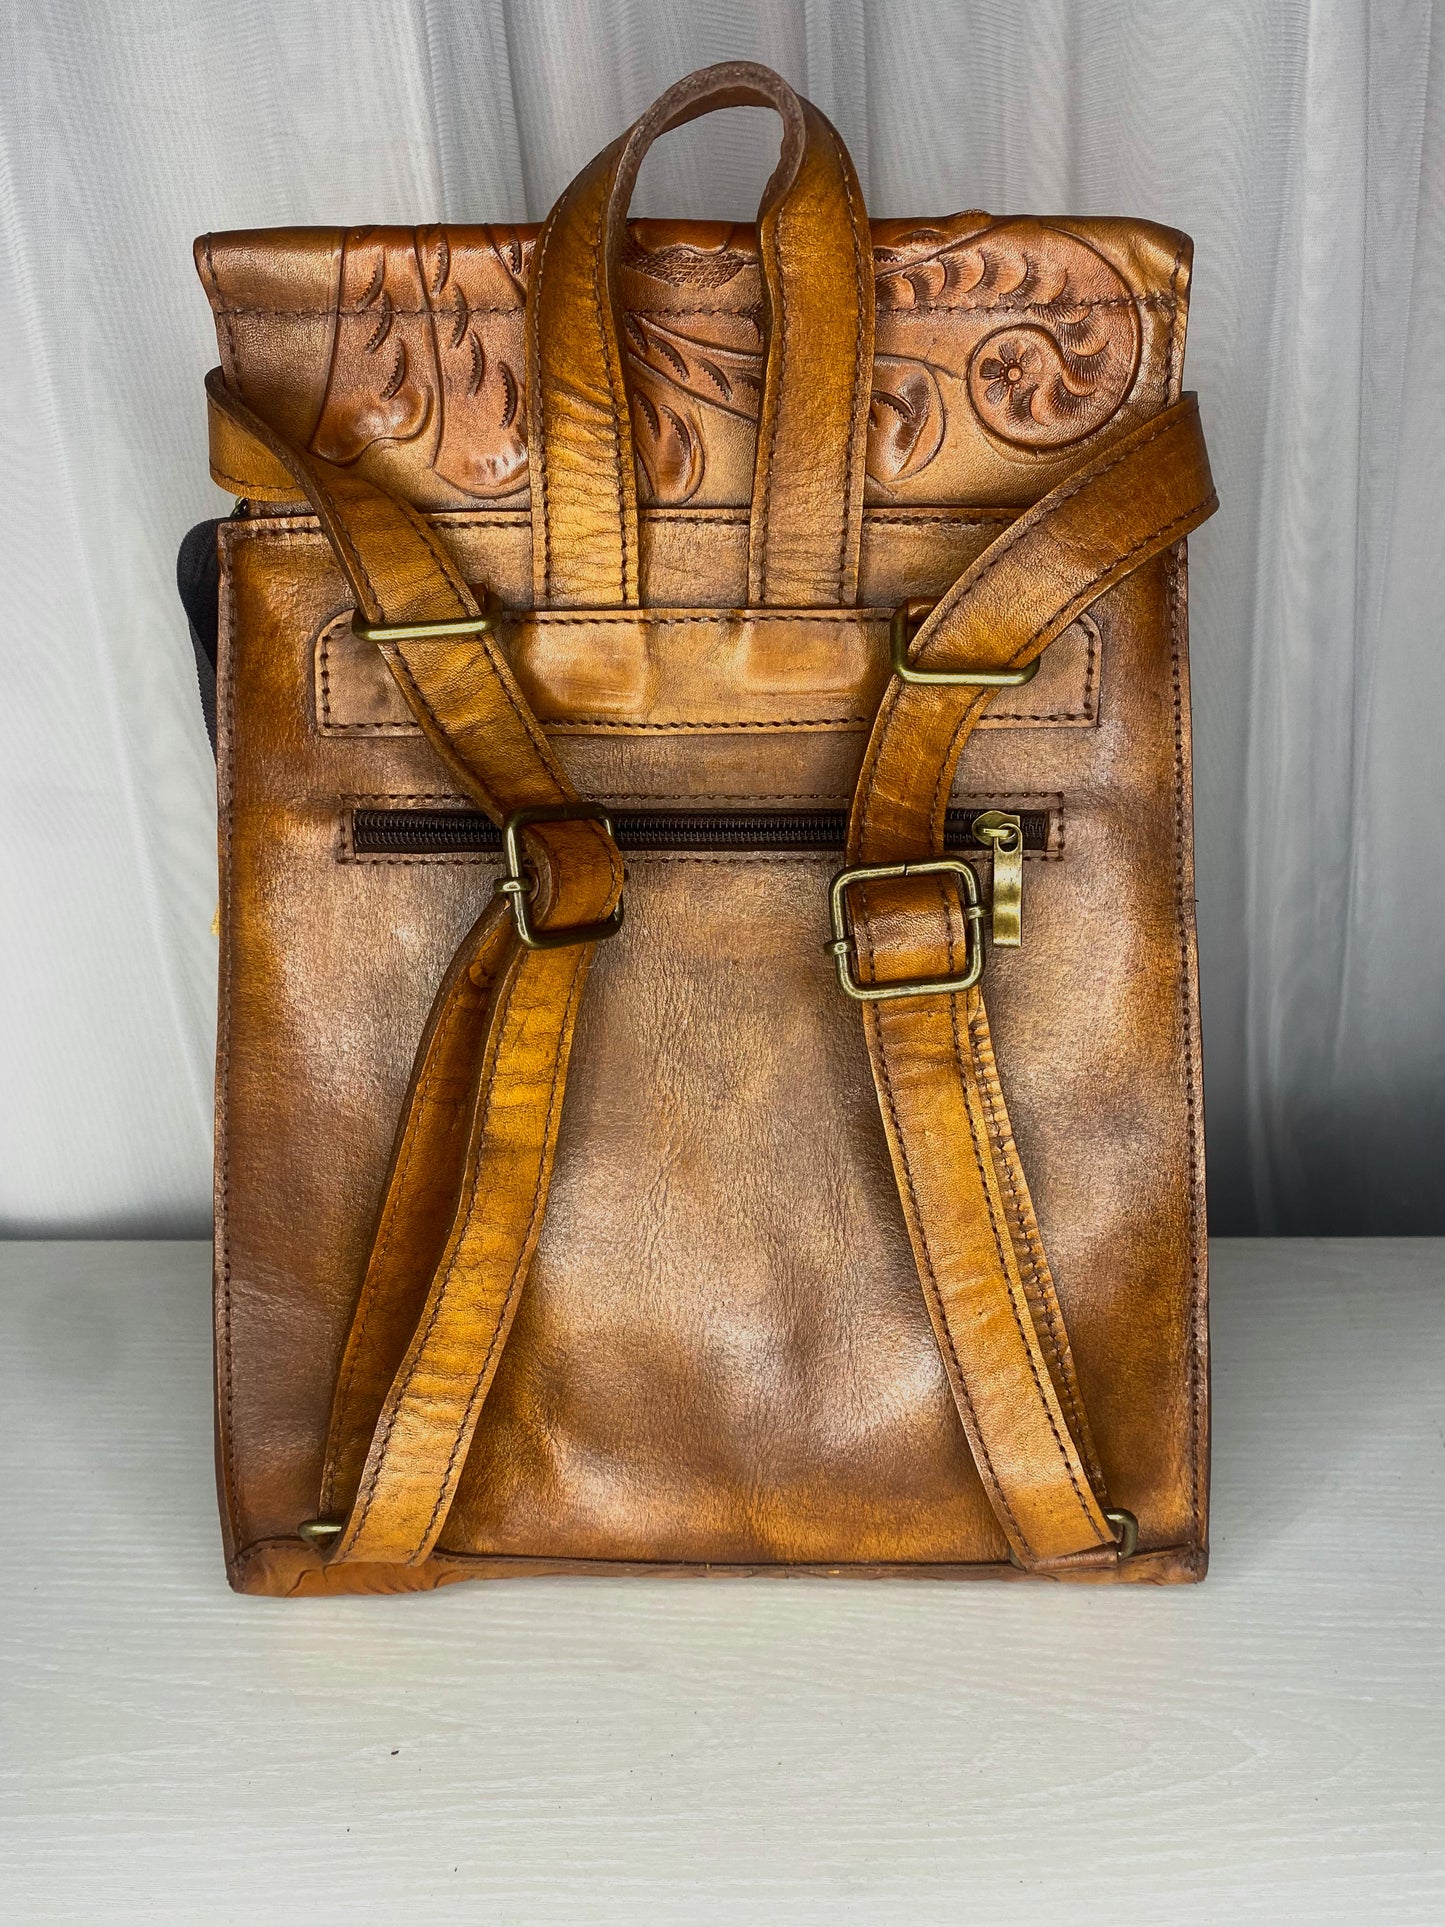 Medium sized authentic leather backpack. Trapezoid shaped with flap with Mexican design on the flap. Straps can be converted to crossbody or used as dual straps.  Back view of straps in color brown.